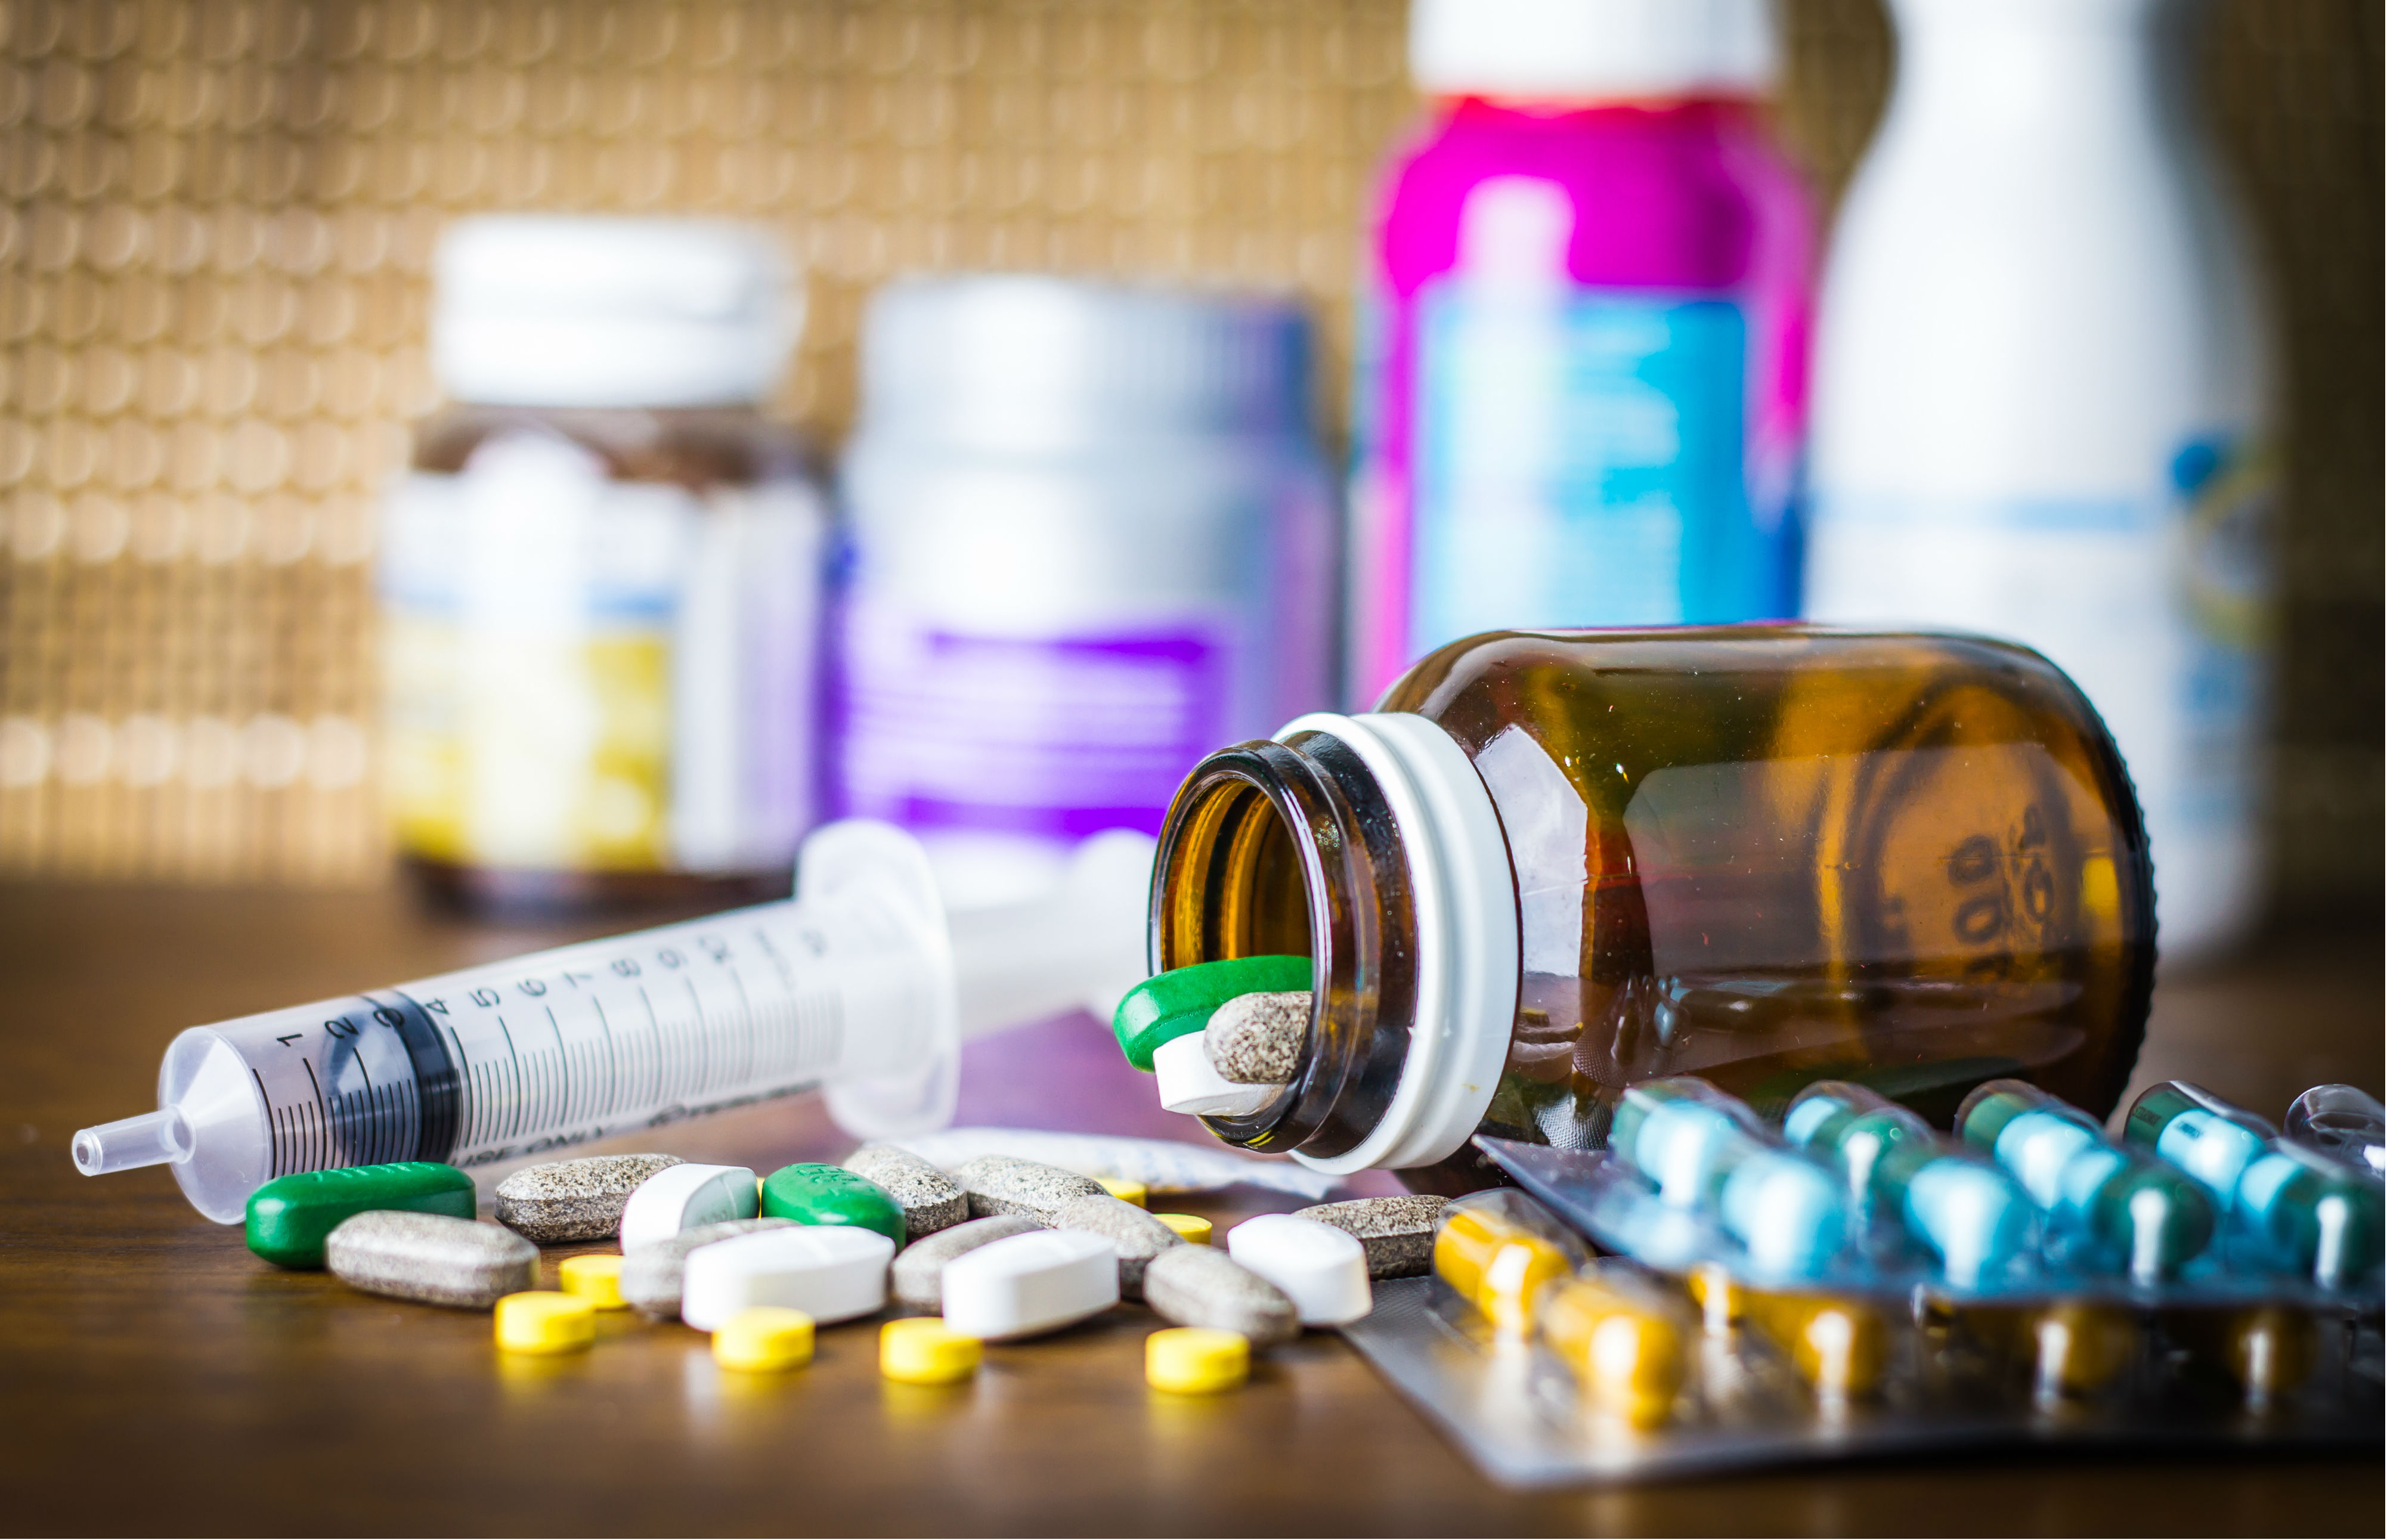 You should disclose any medication you are taking (image: Shutterstock)